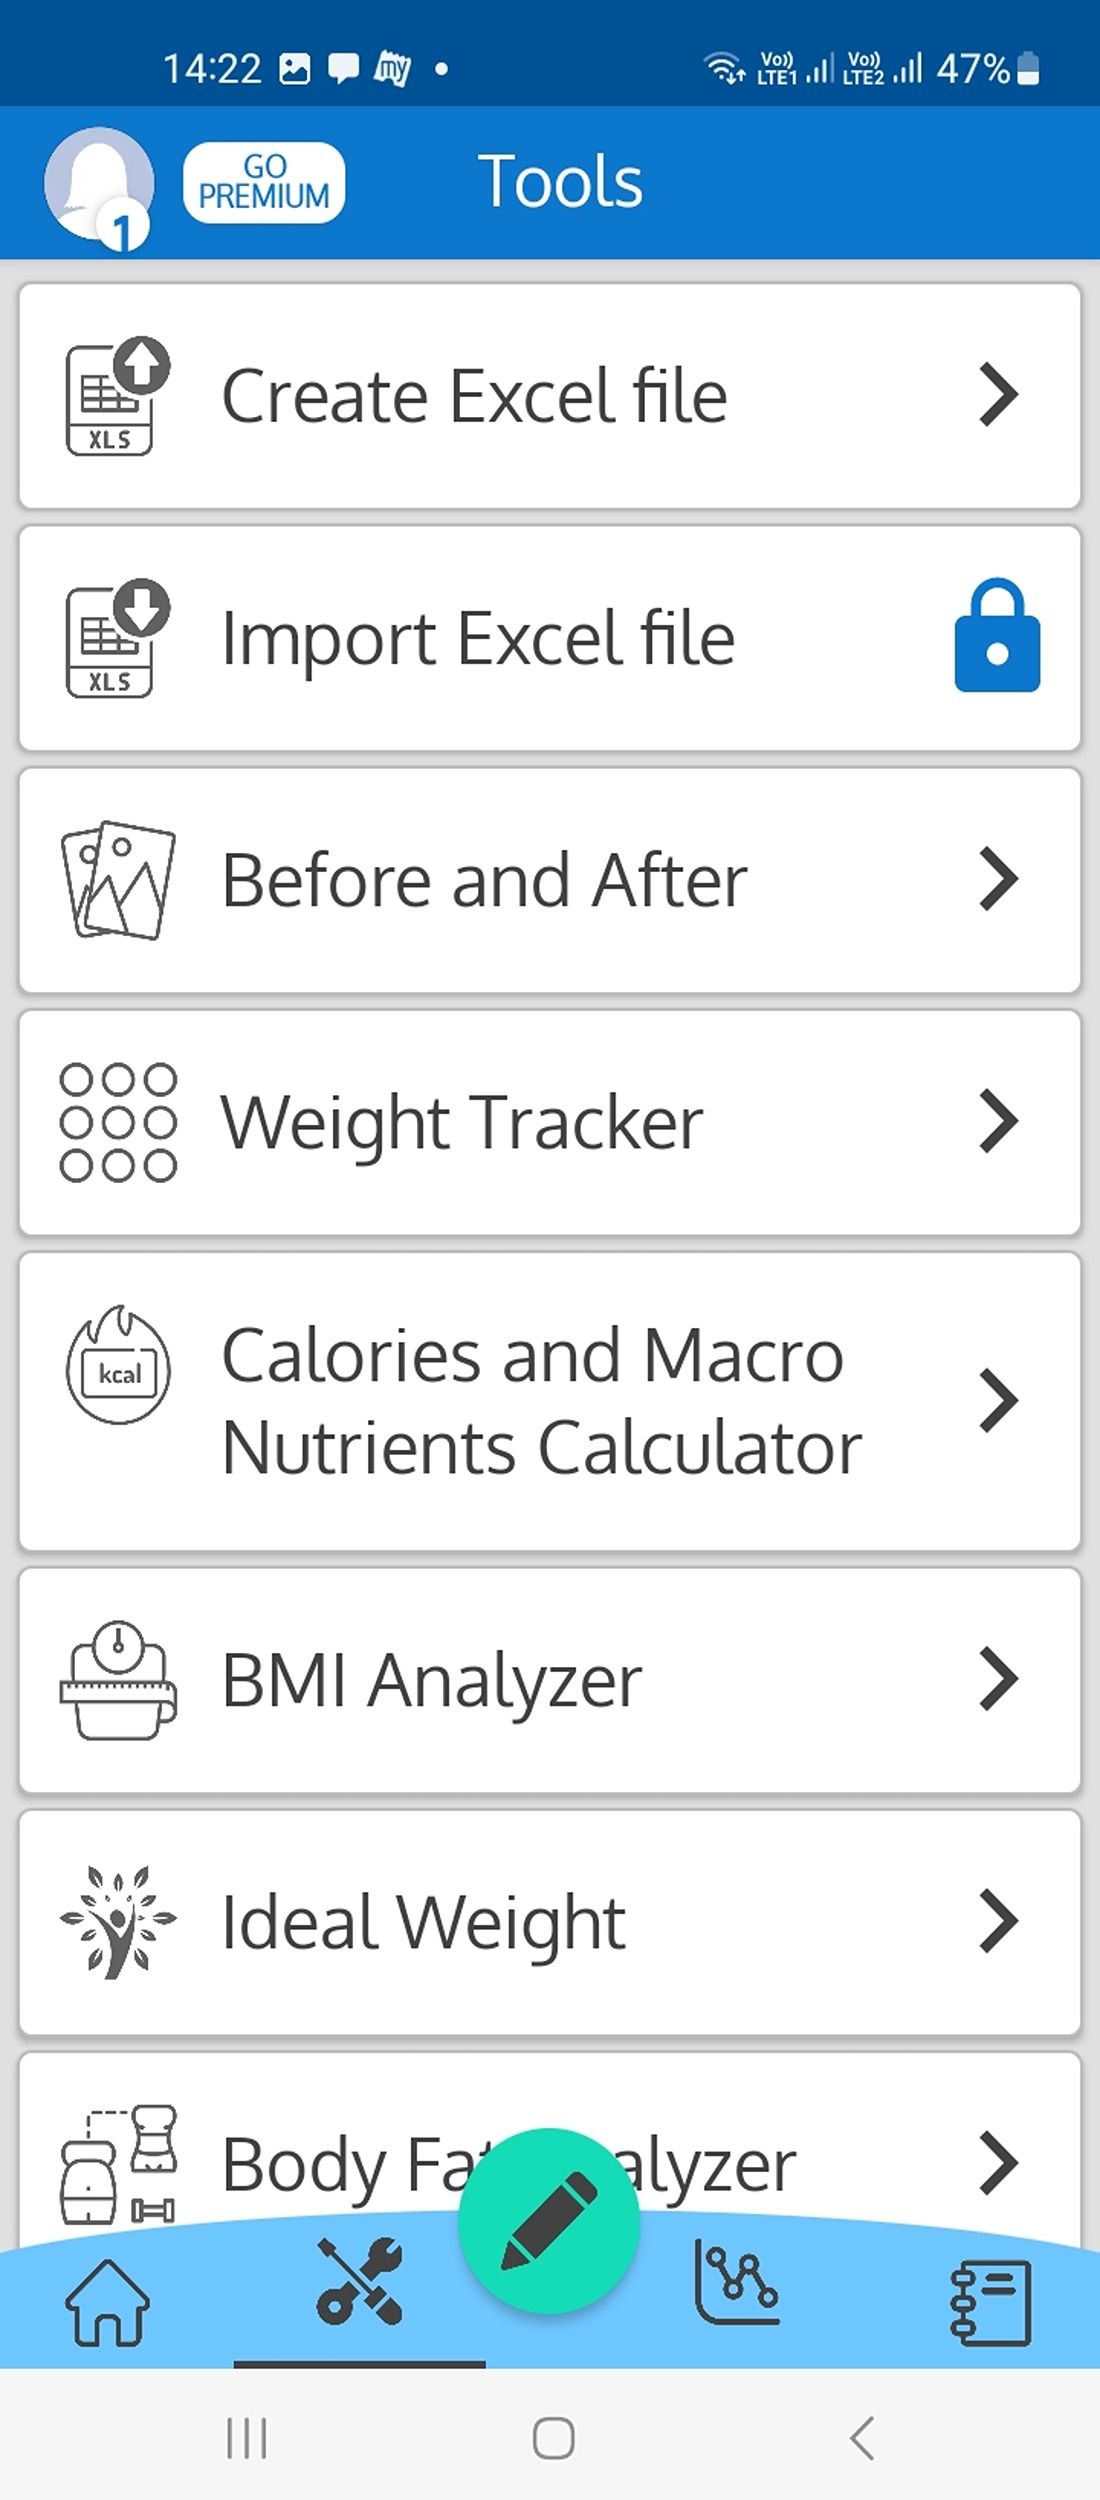 Tools in the Weights and Measures Tracker